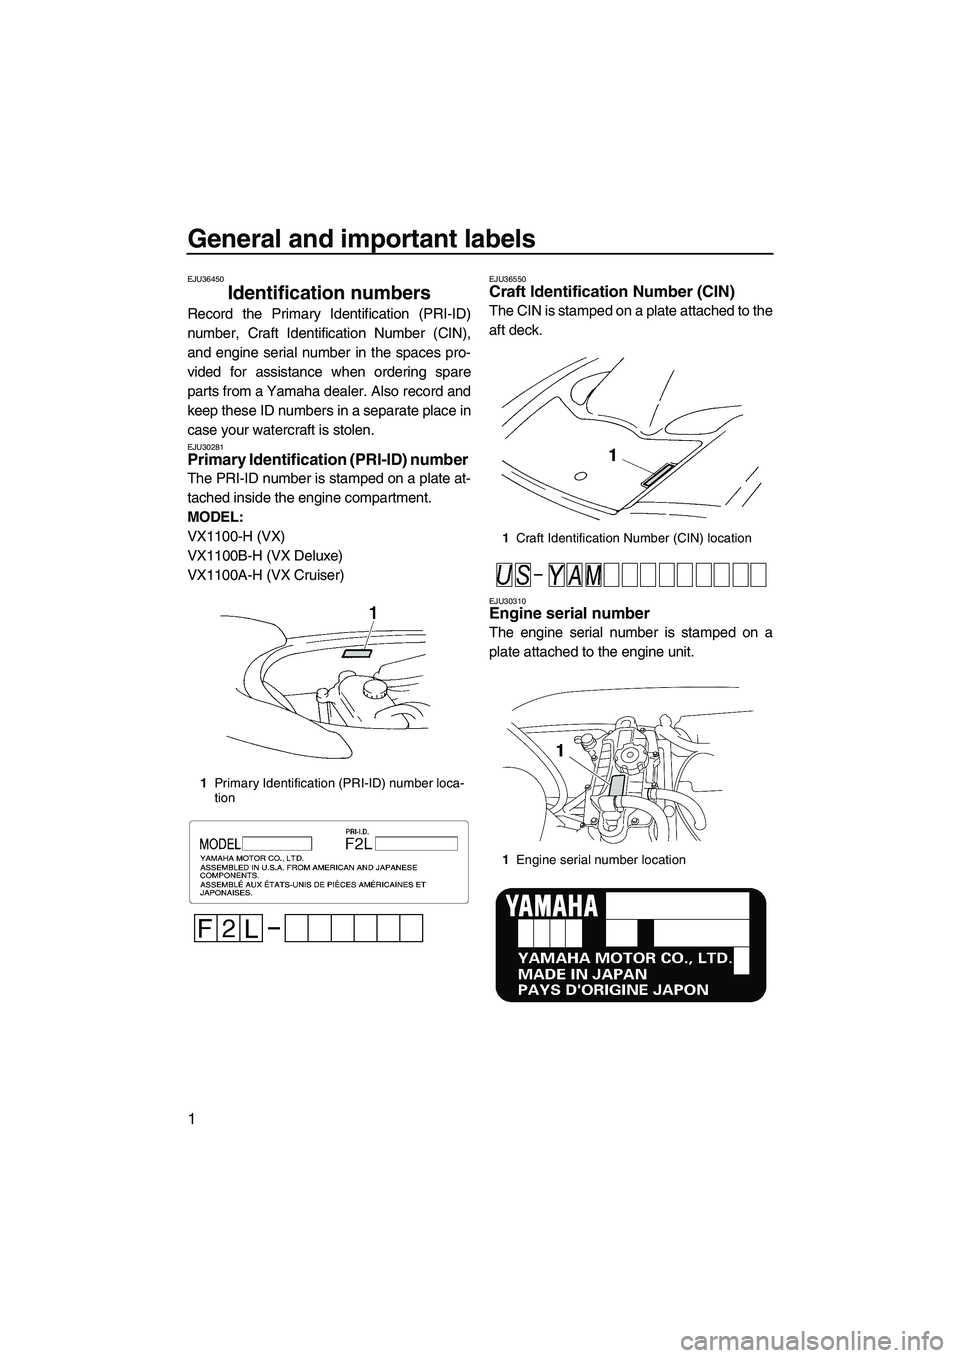 YAMAHA VX SPORT 2009  Owners Manual General and important labels
1
EJU36450
Identification numbers 
Record the Primary Identification (PRI-ID)
number, Craft Identification Number (CIN),
and engine serial number in the spaces pro-
vided 